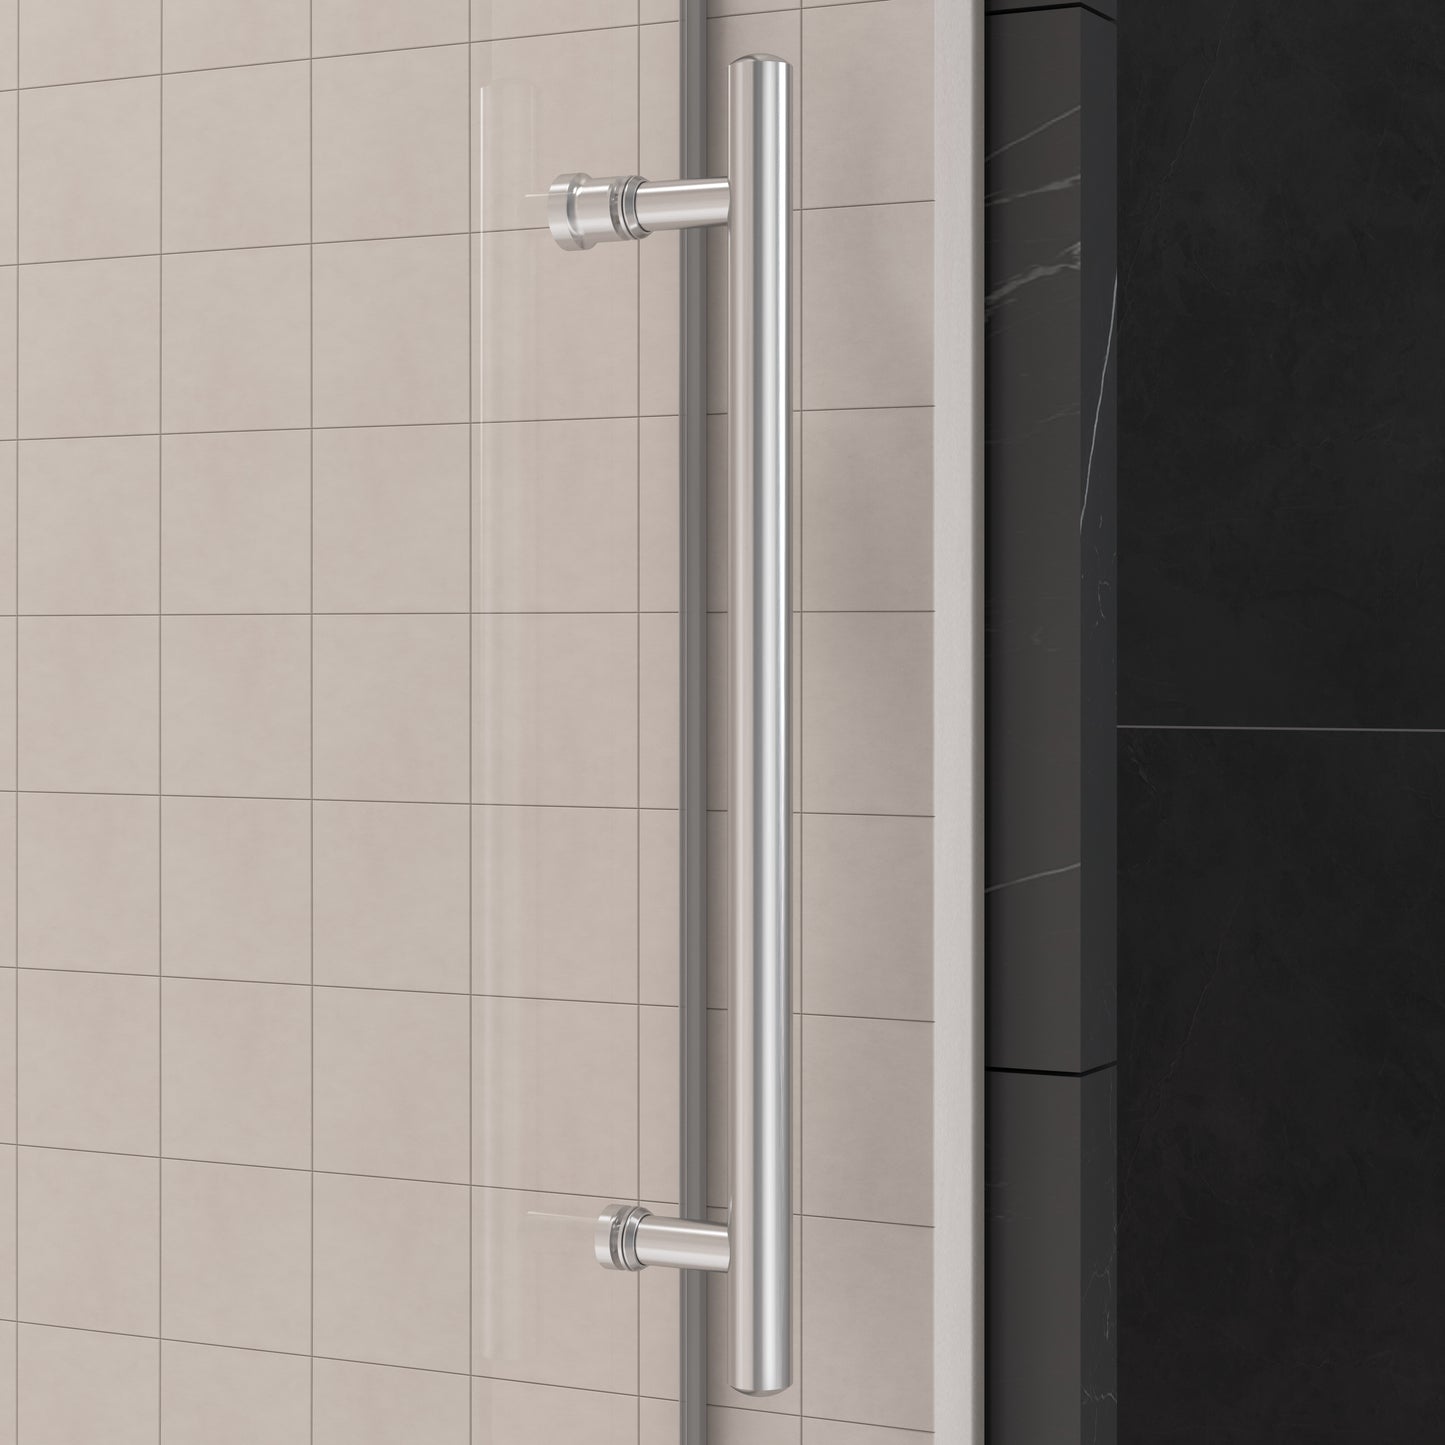 Gorgeous Single Sliding Frameless Shower Door With 3/8 Inch Clear Glass color:brushed nickel